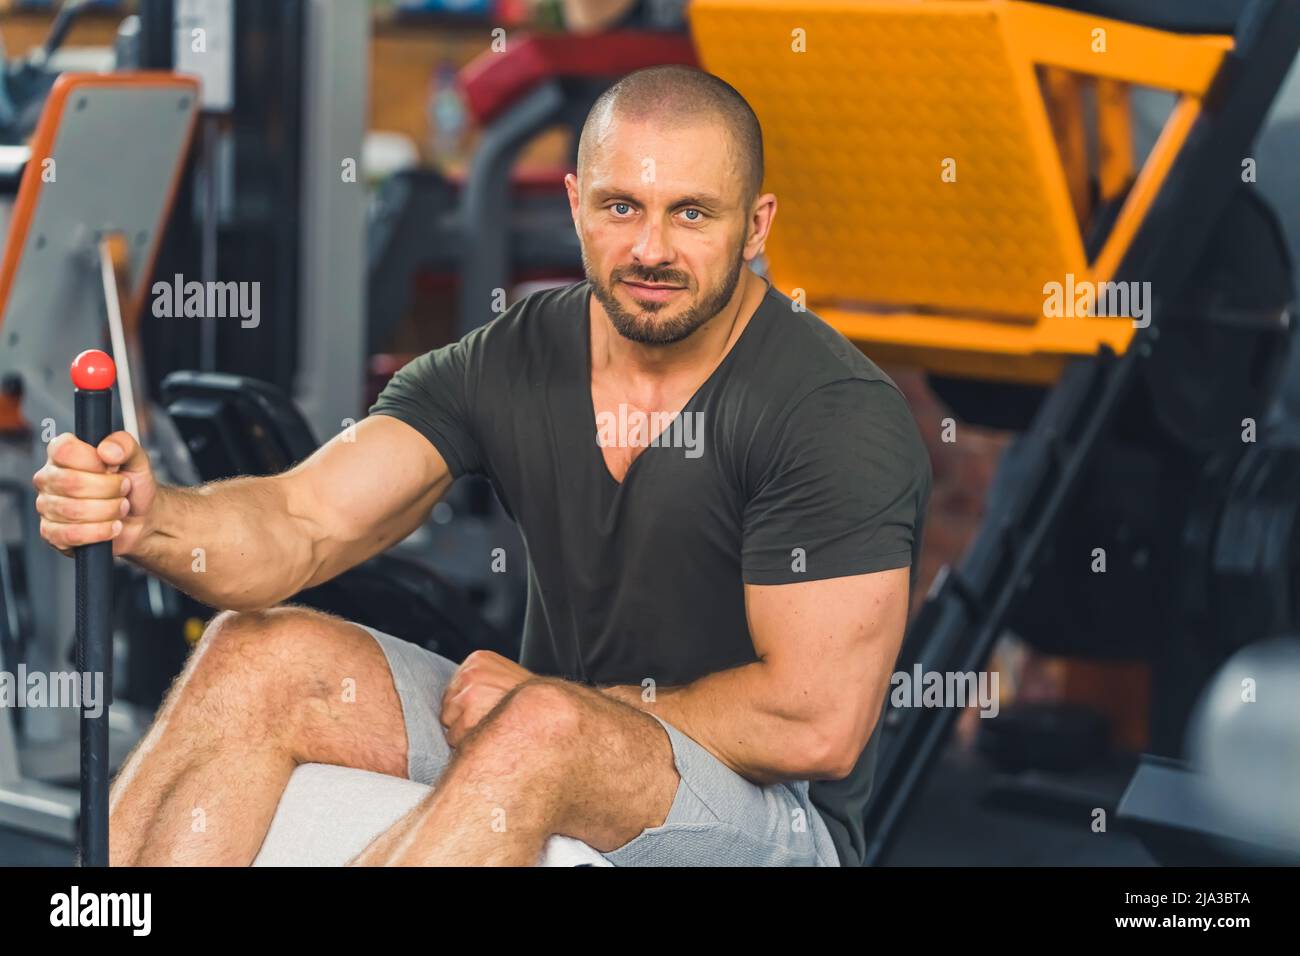 Portrait of a muscular man trening at the gym and looking at the camera. High quality photo Stock Photo